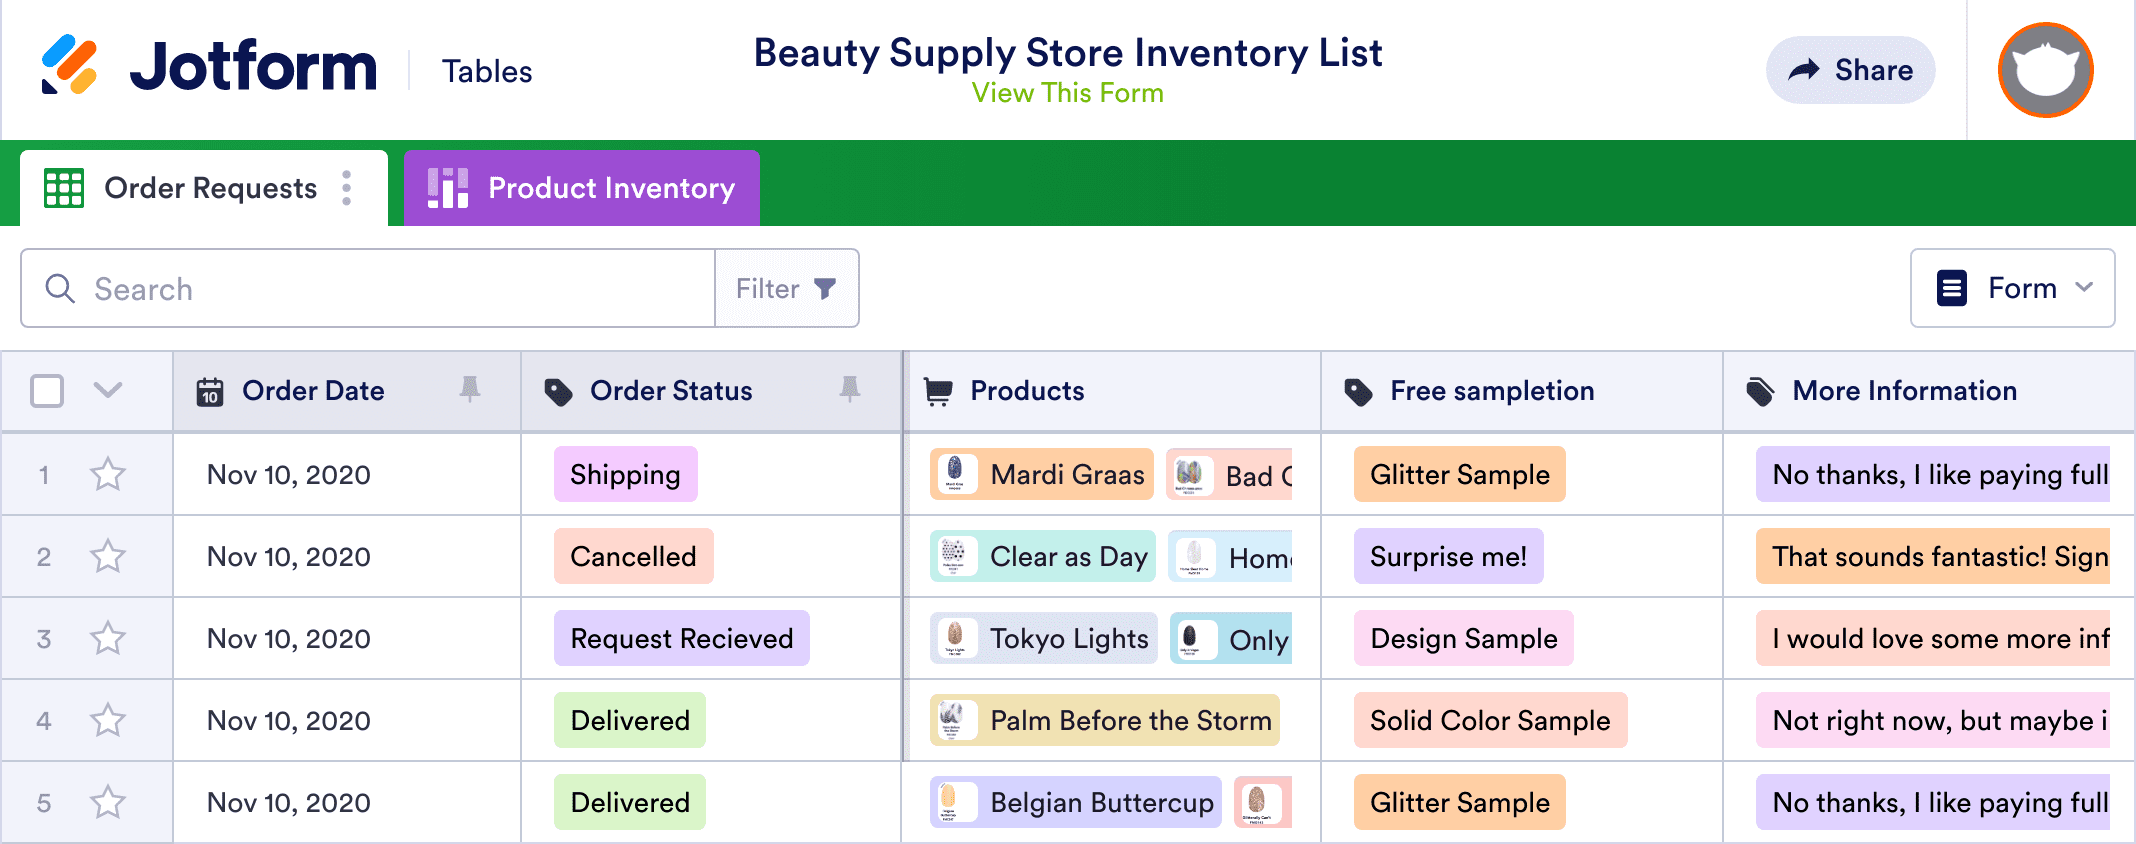 Beauty Supply Store Inventory List